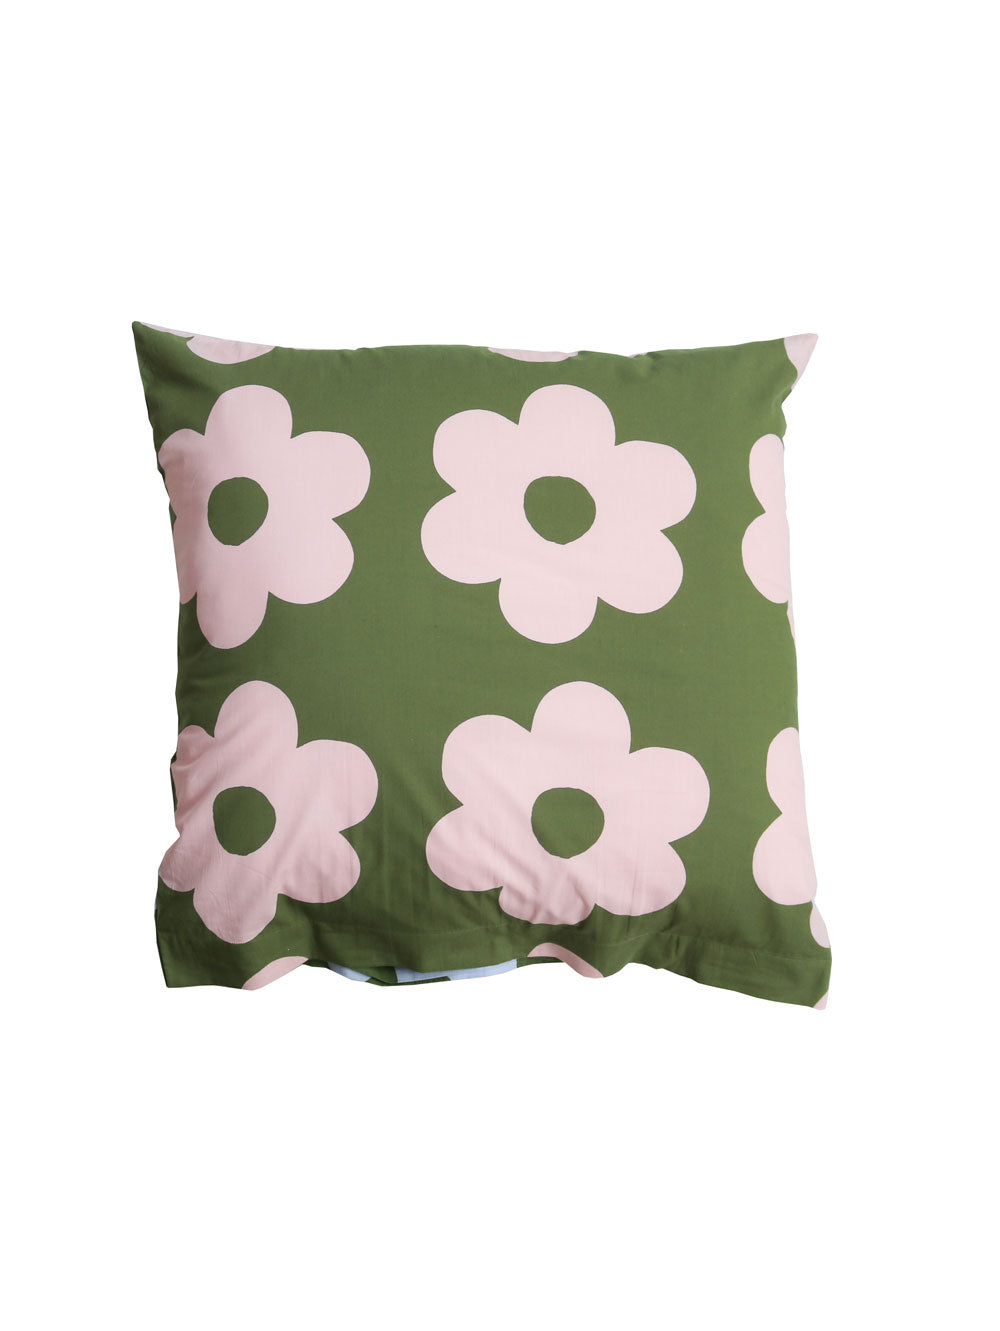 Flowerbed Euro Pillowcase Set  by Mosey Me